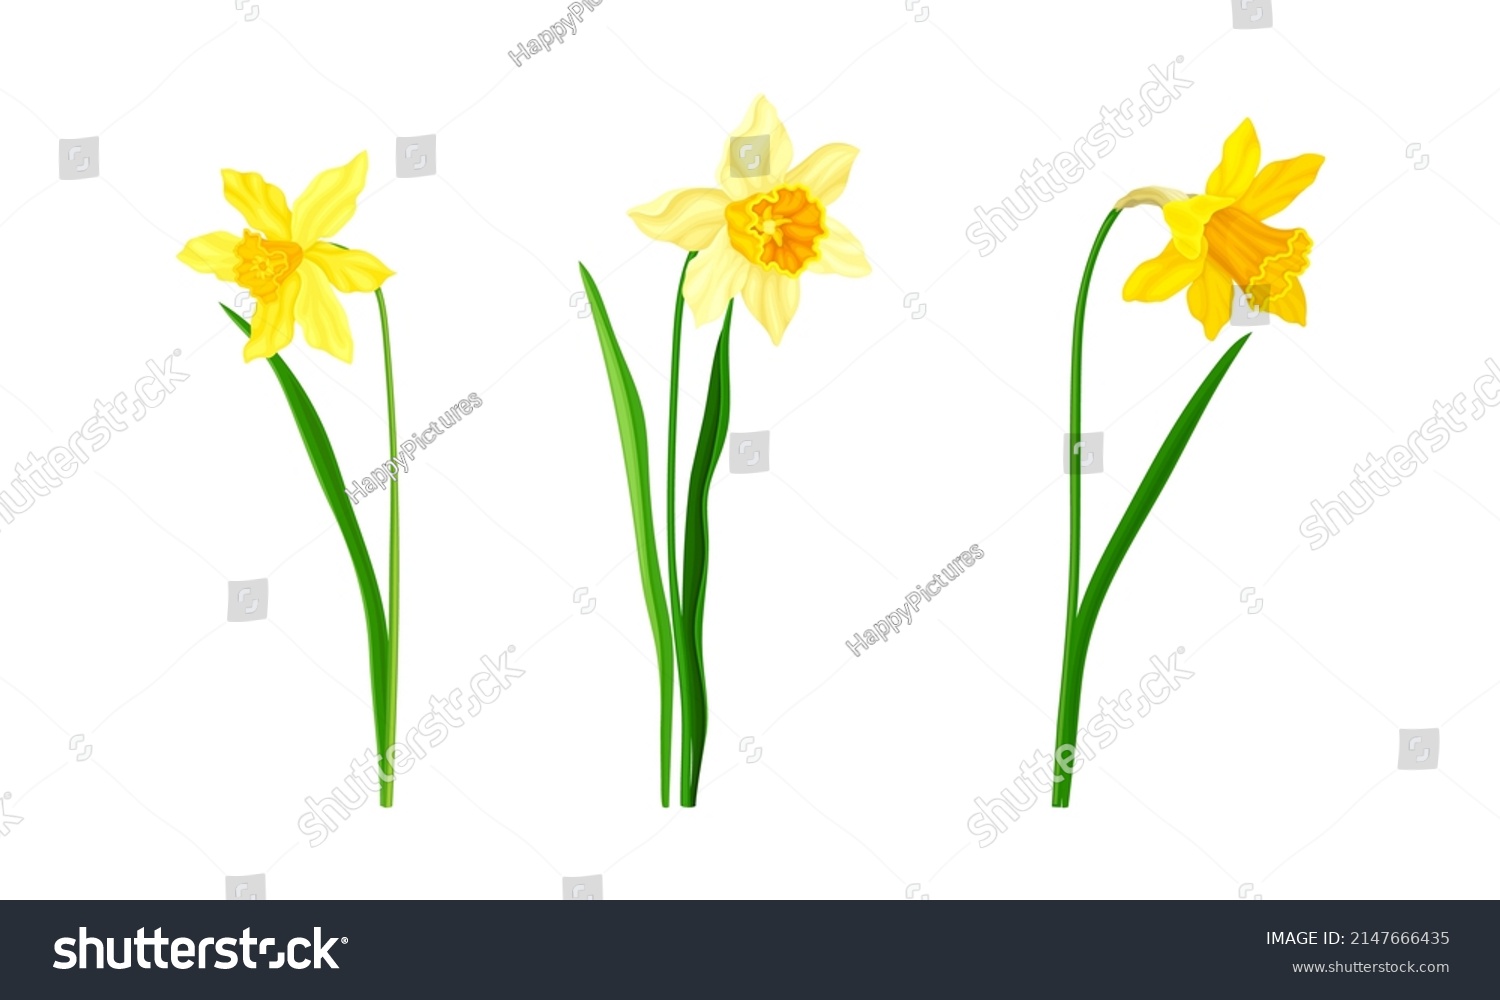 SVG of Daffodil or Jonquil Spring Flowering Plant with Yellow Flower and Leafless Stem Vector Set svg